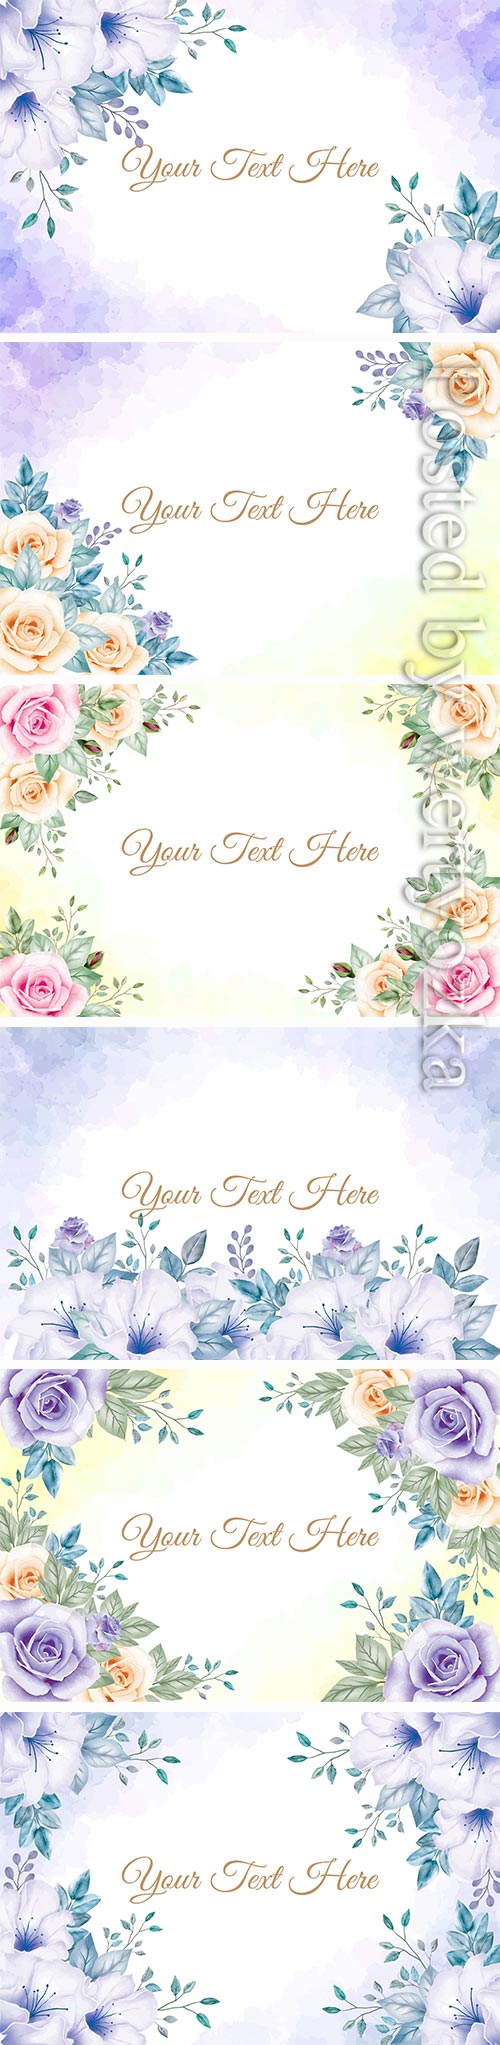 Floral frame vector background watercolor